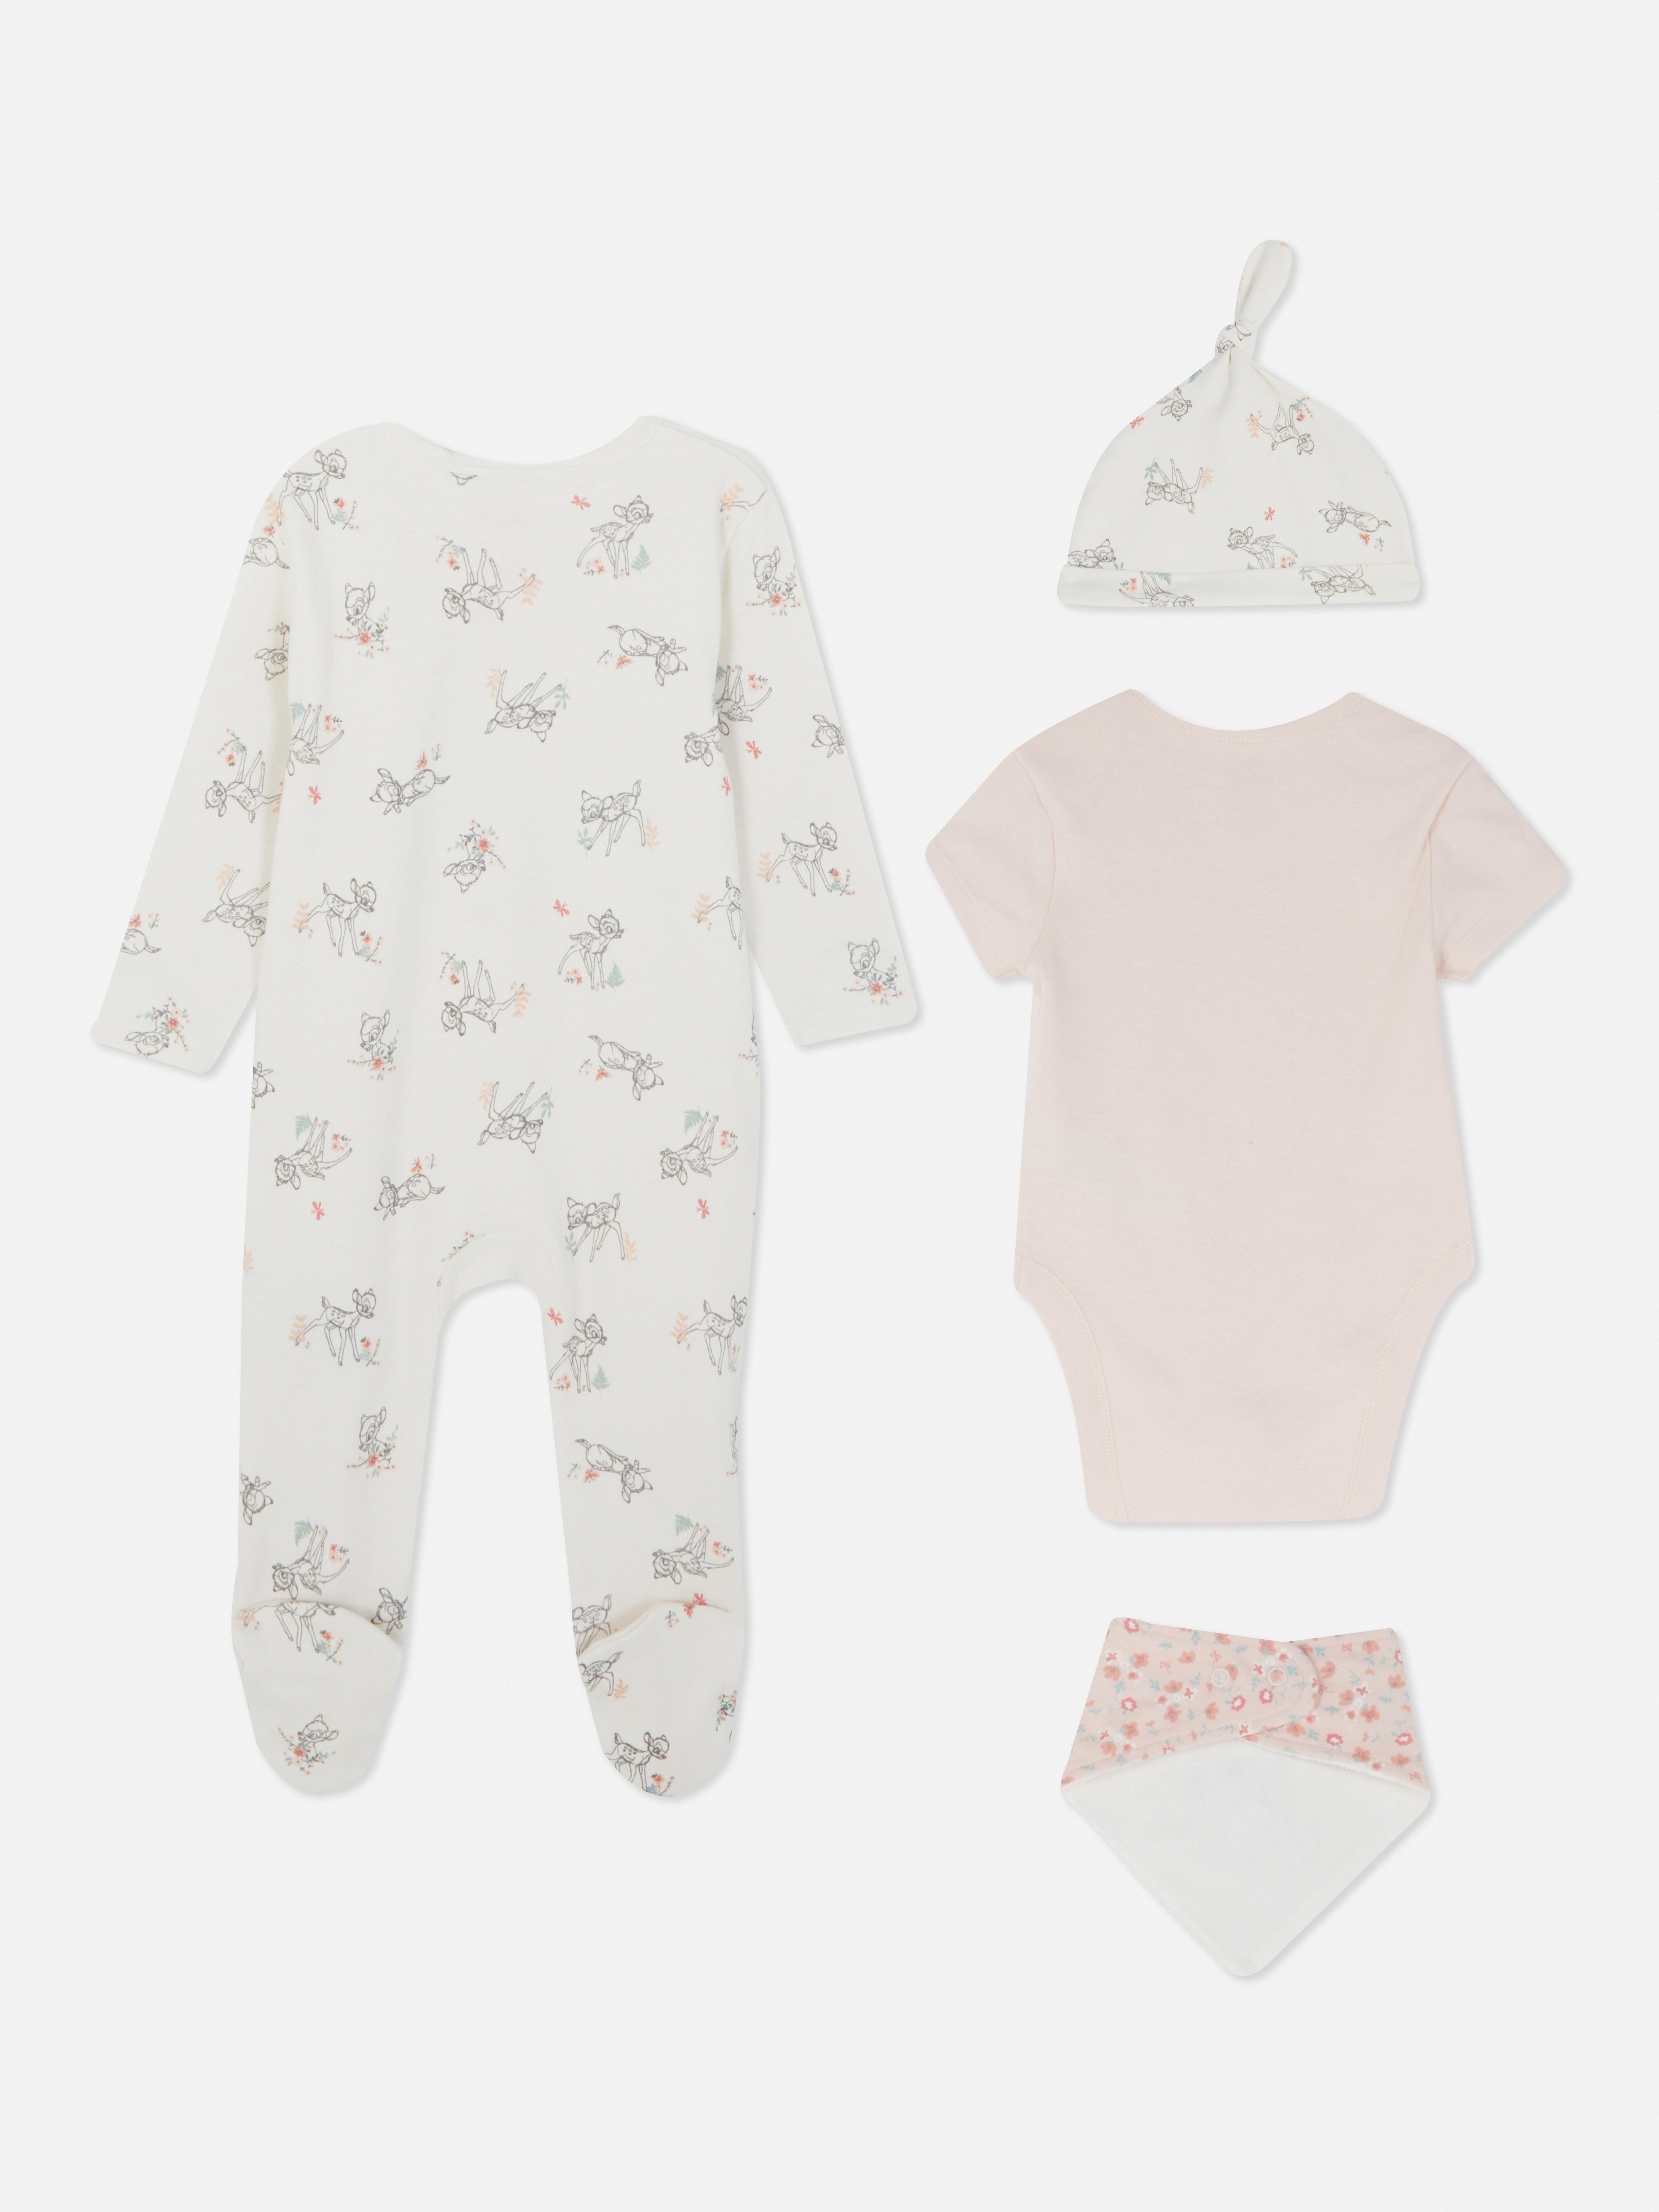 Disney’s Bambi and Thumper Clothing and Accessories Set